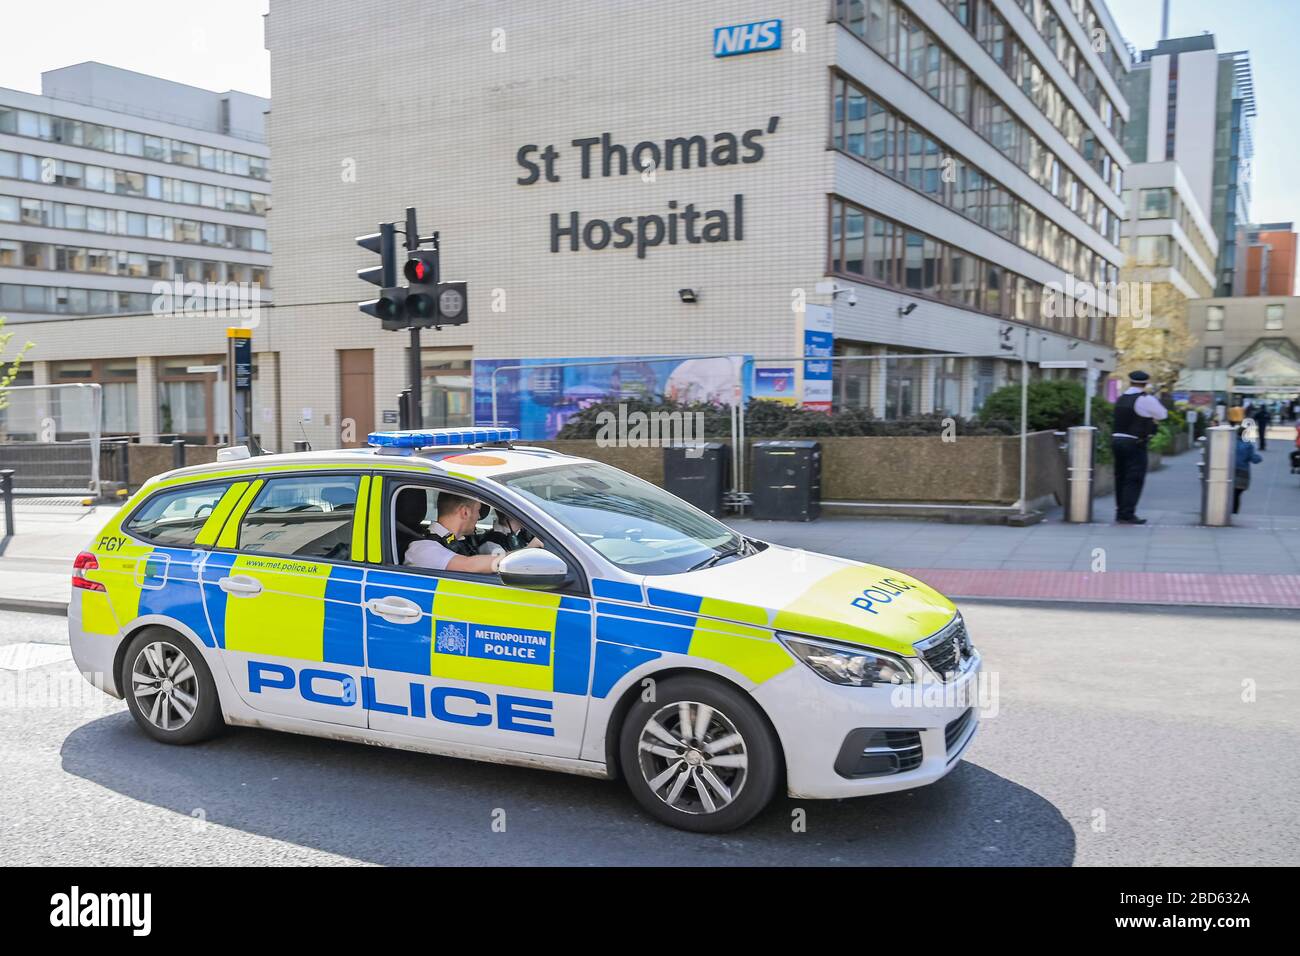 London, UK. 07th Apr, 2020. Security is tightened at St Thomas' Hospital, where the Prime Minister Boris Johnson is in intensive care. The 'lockdown' continues for the Coronavirus (Covid 19) outbreak in London. Credit: Guy Bell/Alamy Live News Stock Photo